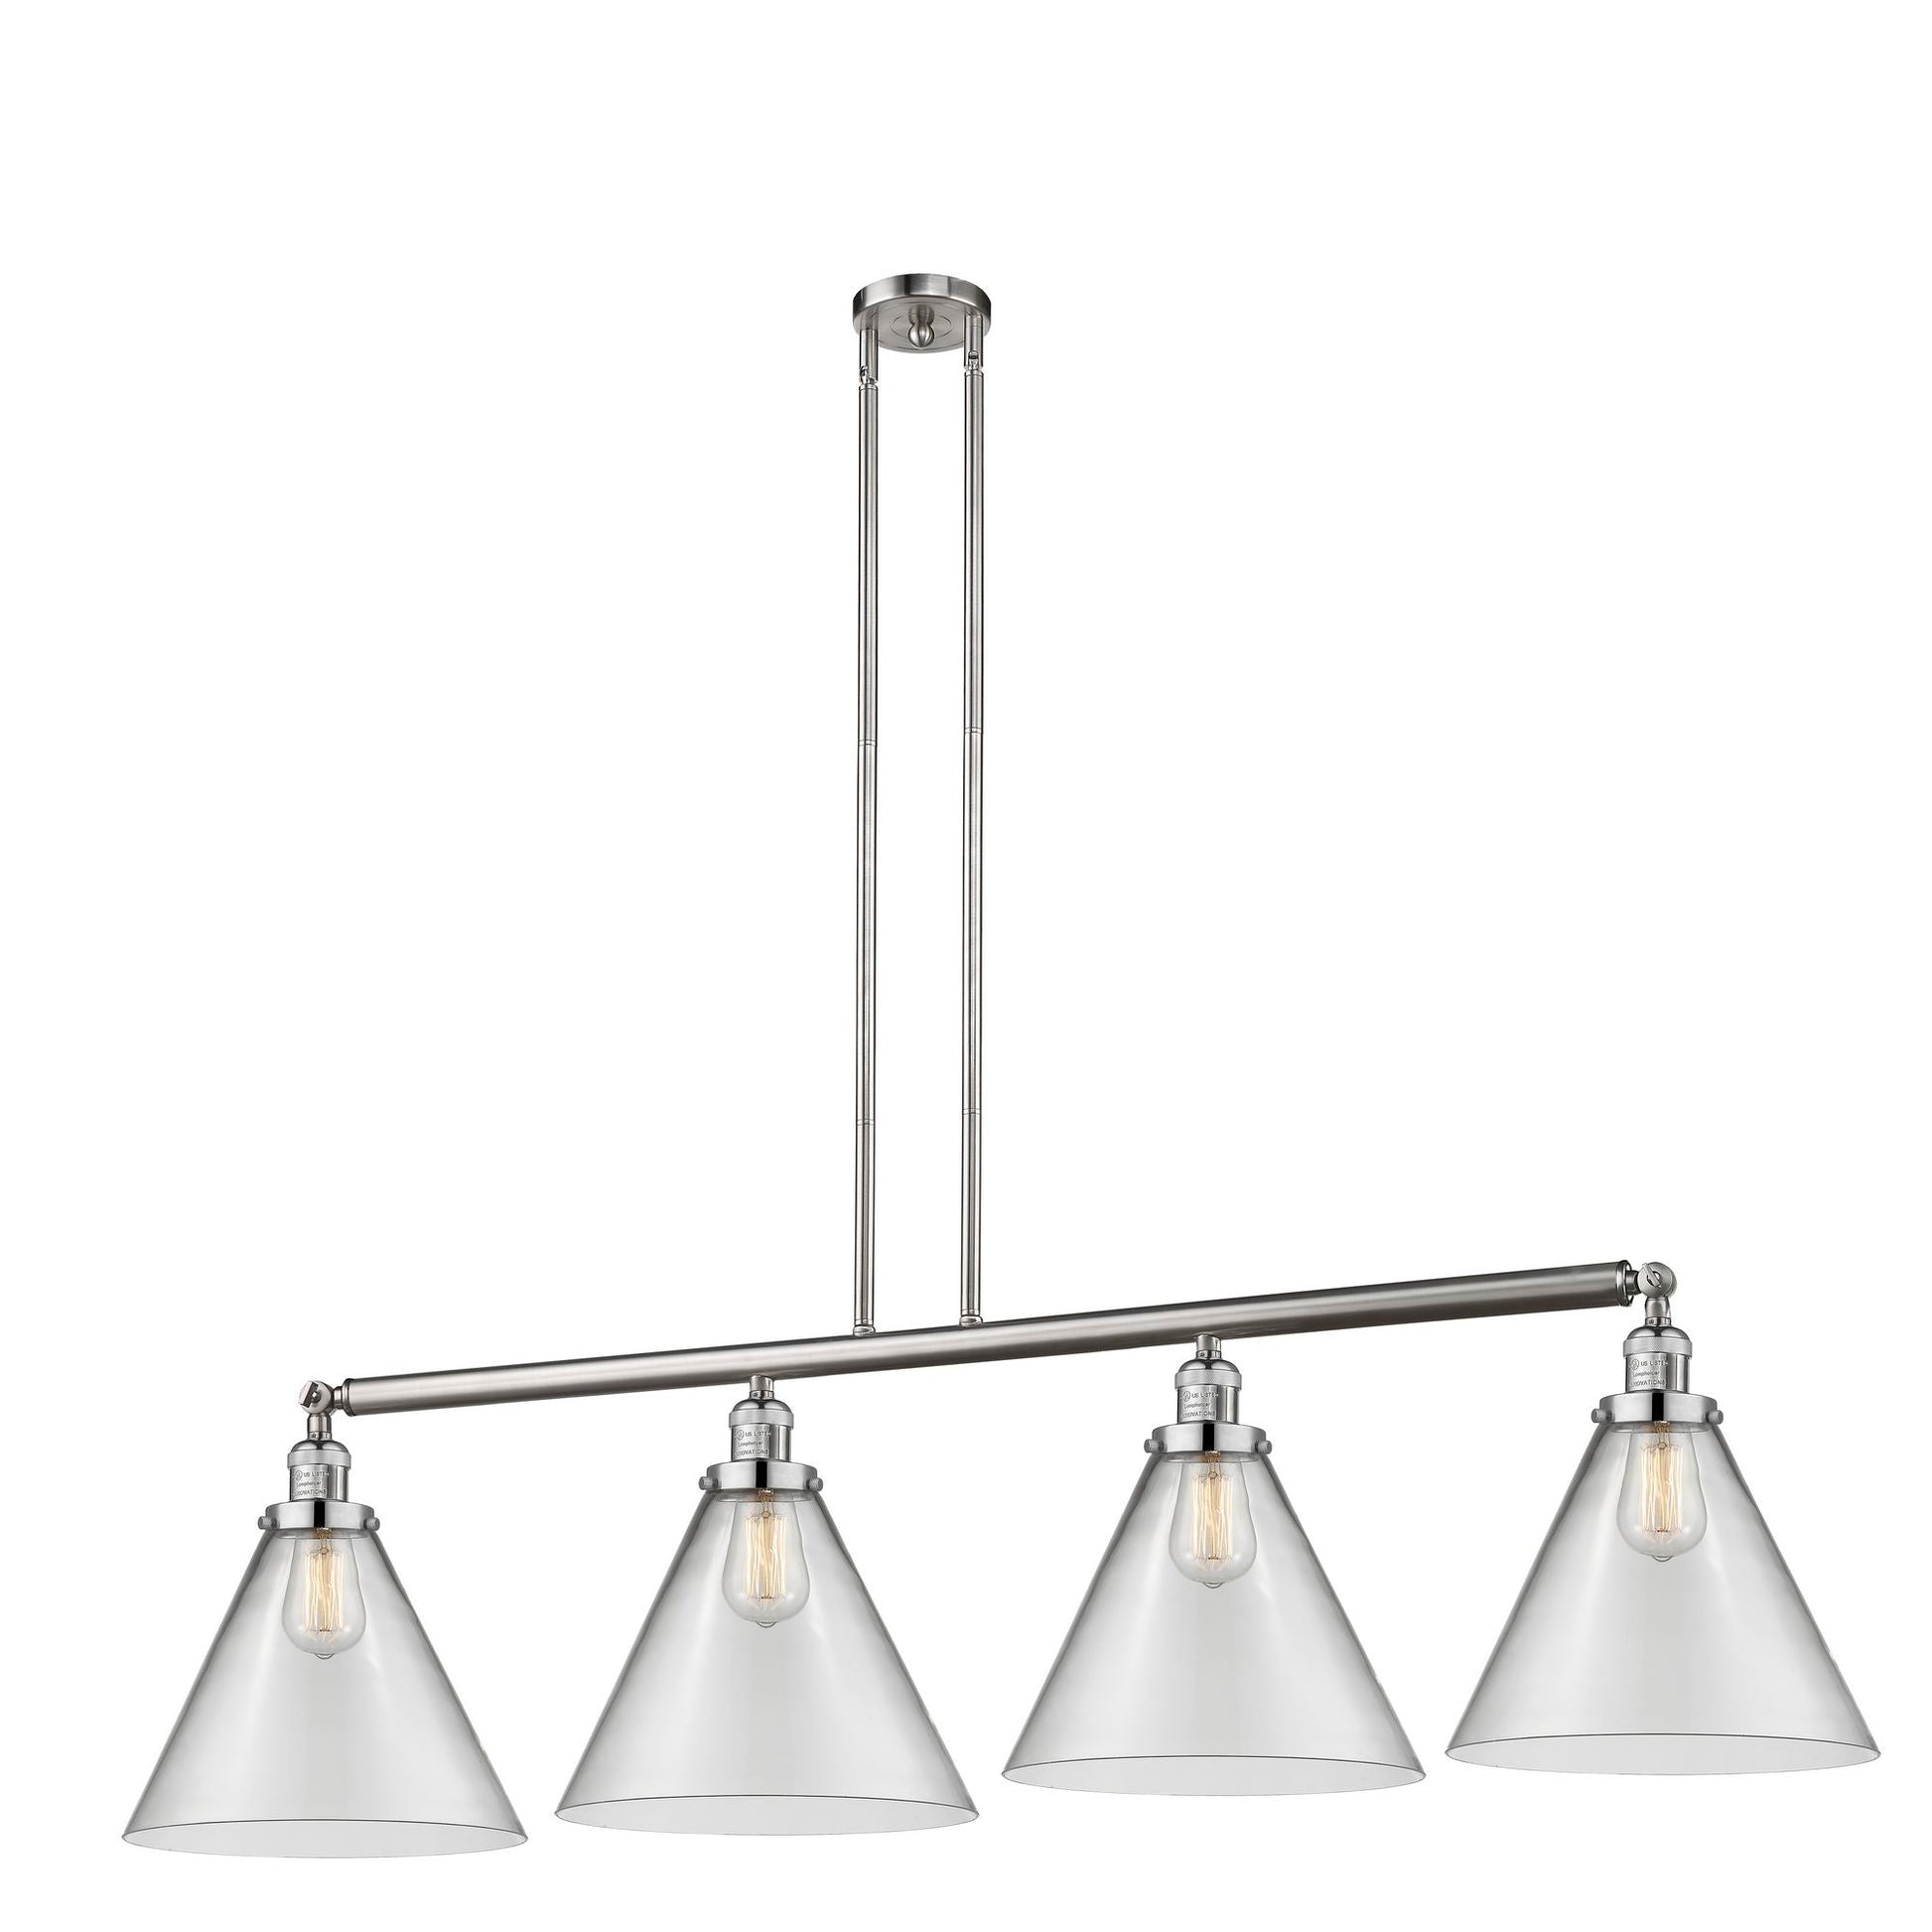 214-SN-G42-L 4-Light 56" Brushed Satin Nickel Island Light - Clear Cone 12" Glass - LED Bulb - Dimmensions: 56 x 12 x 14<br>Minimum Height : 24.25<br>Maximum Height : 48.25 - Sloped Ceiling Compatible: Yes